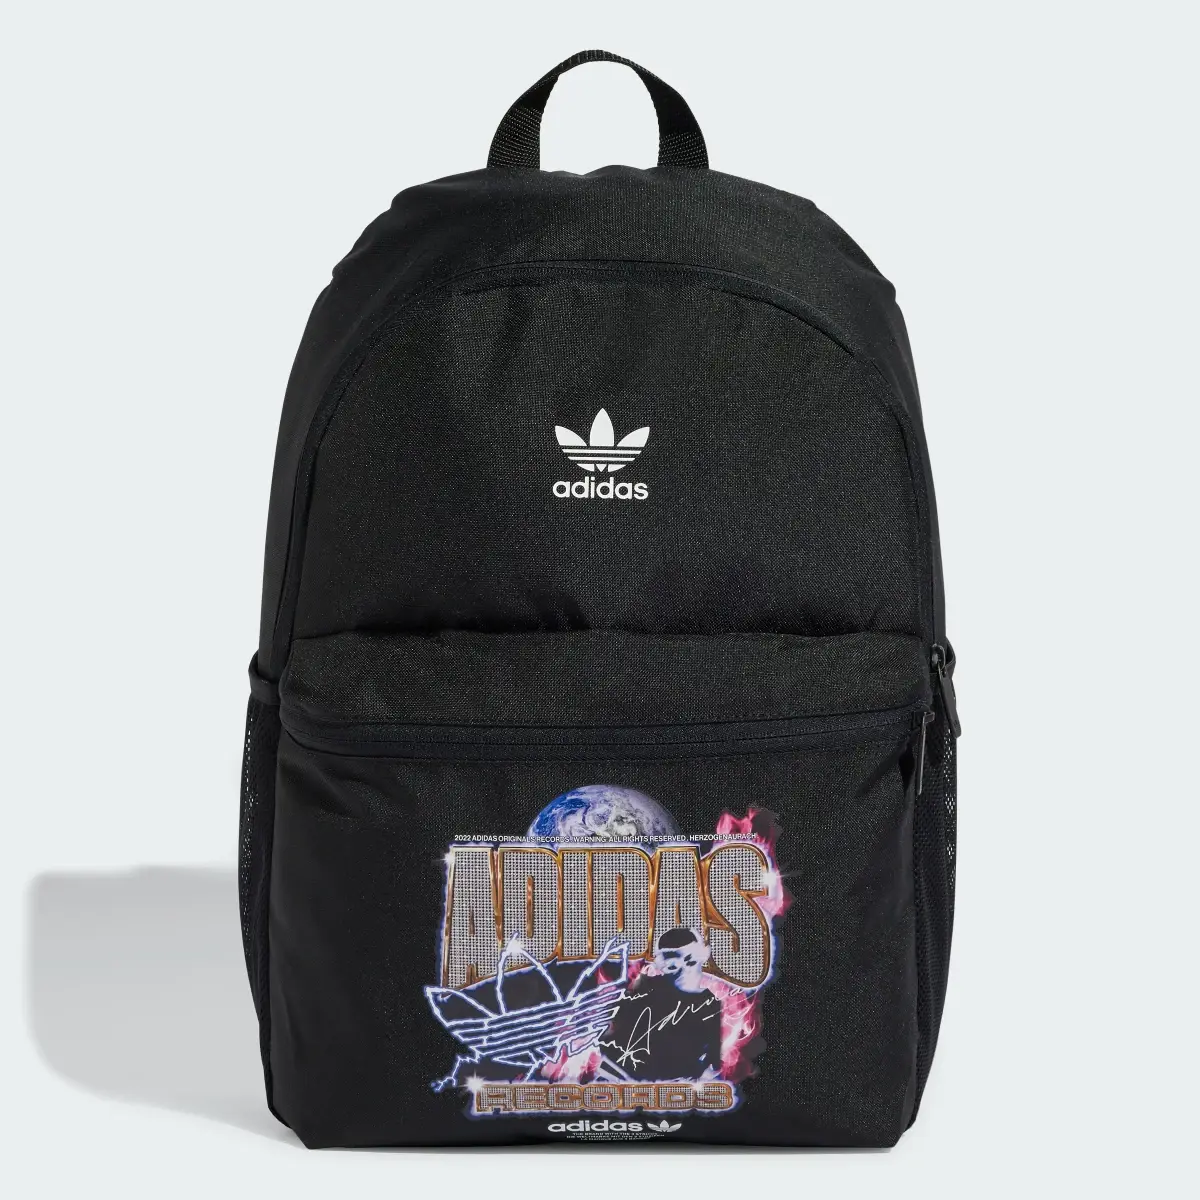 Adidas Youth Backpack. 1